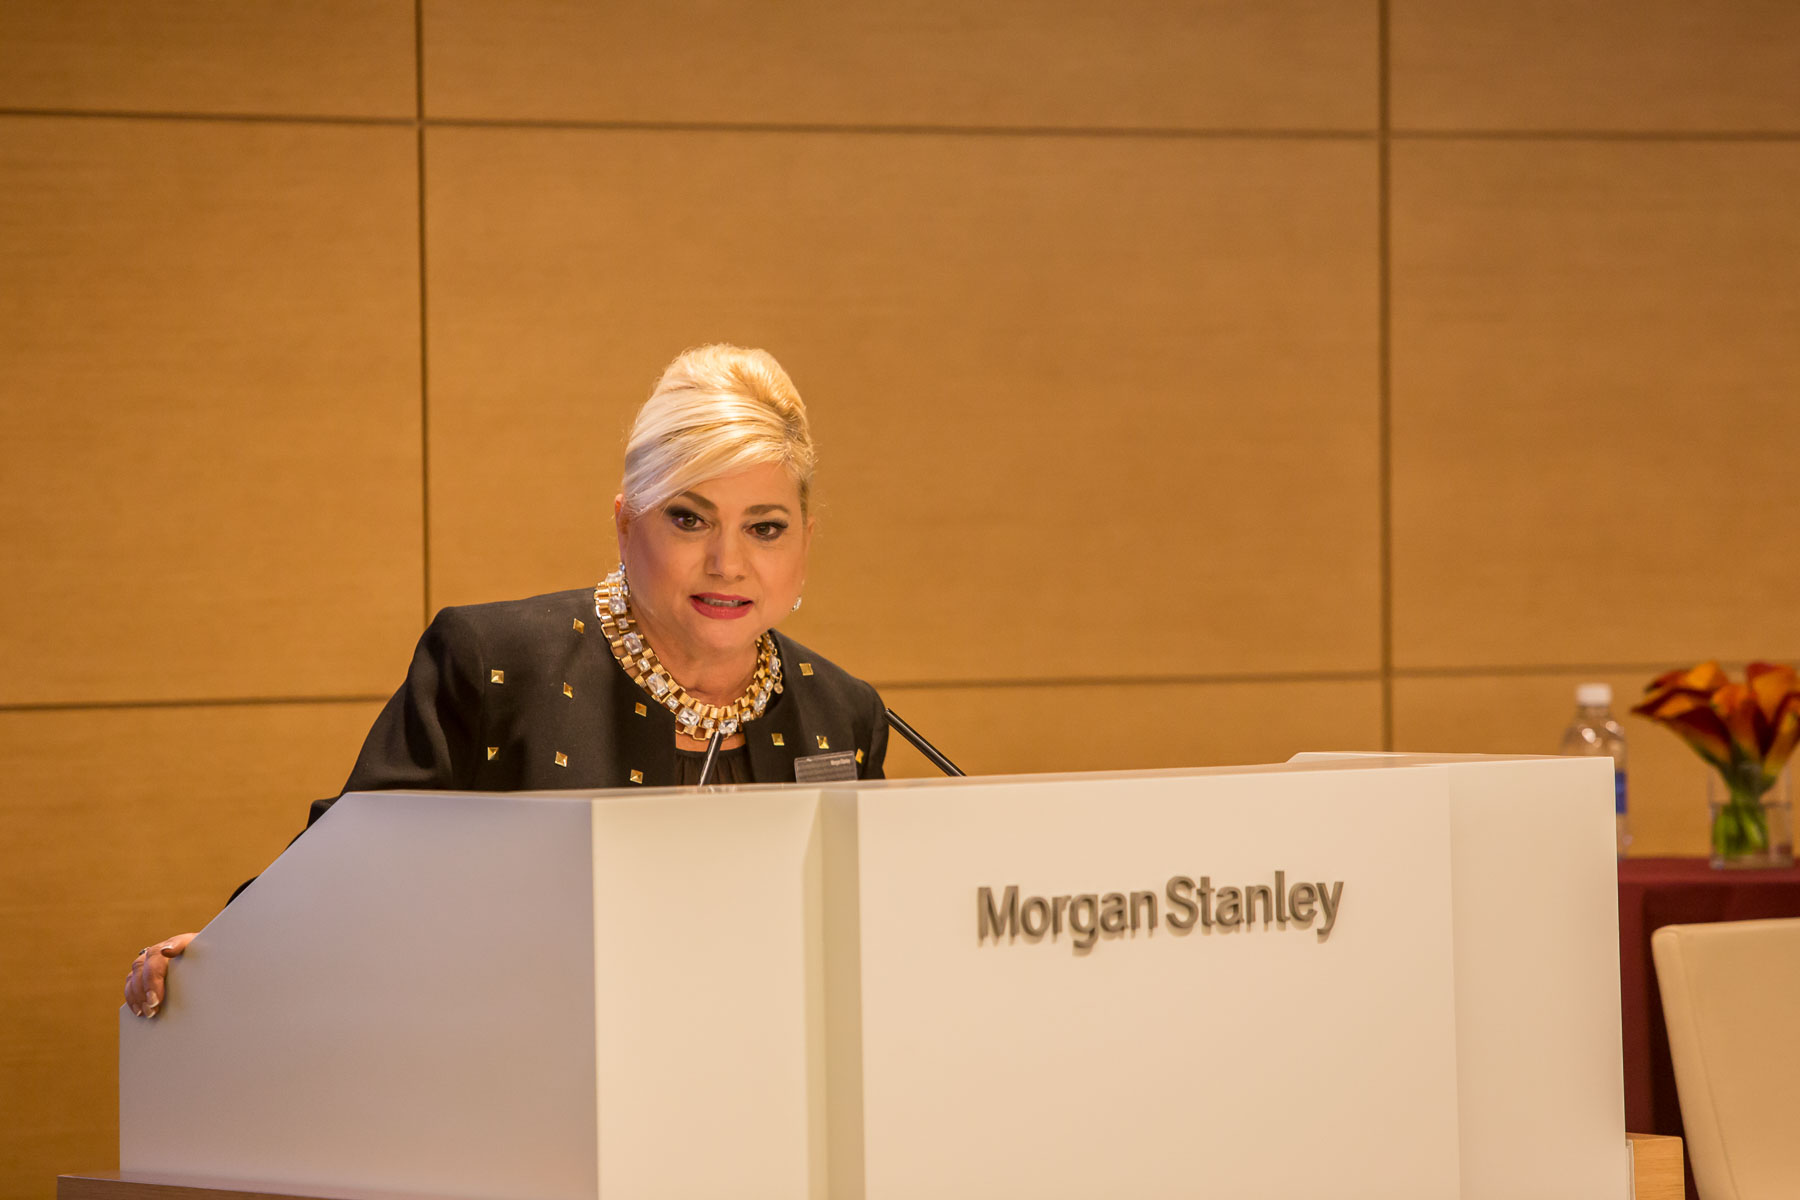 A woman speaking at a lectern with a Morgan Stanley logo.